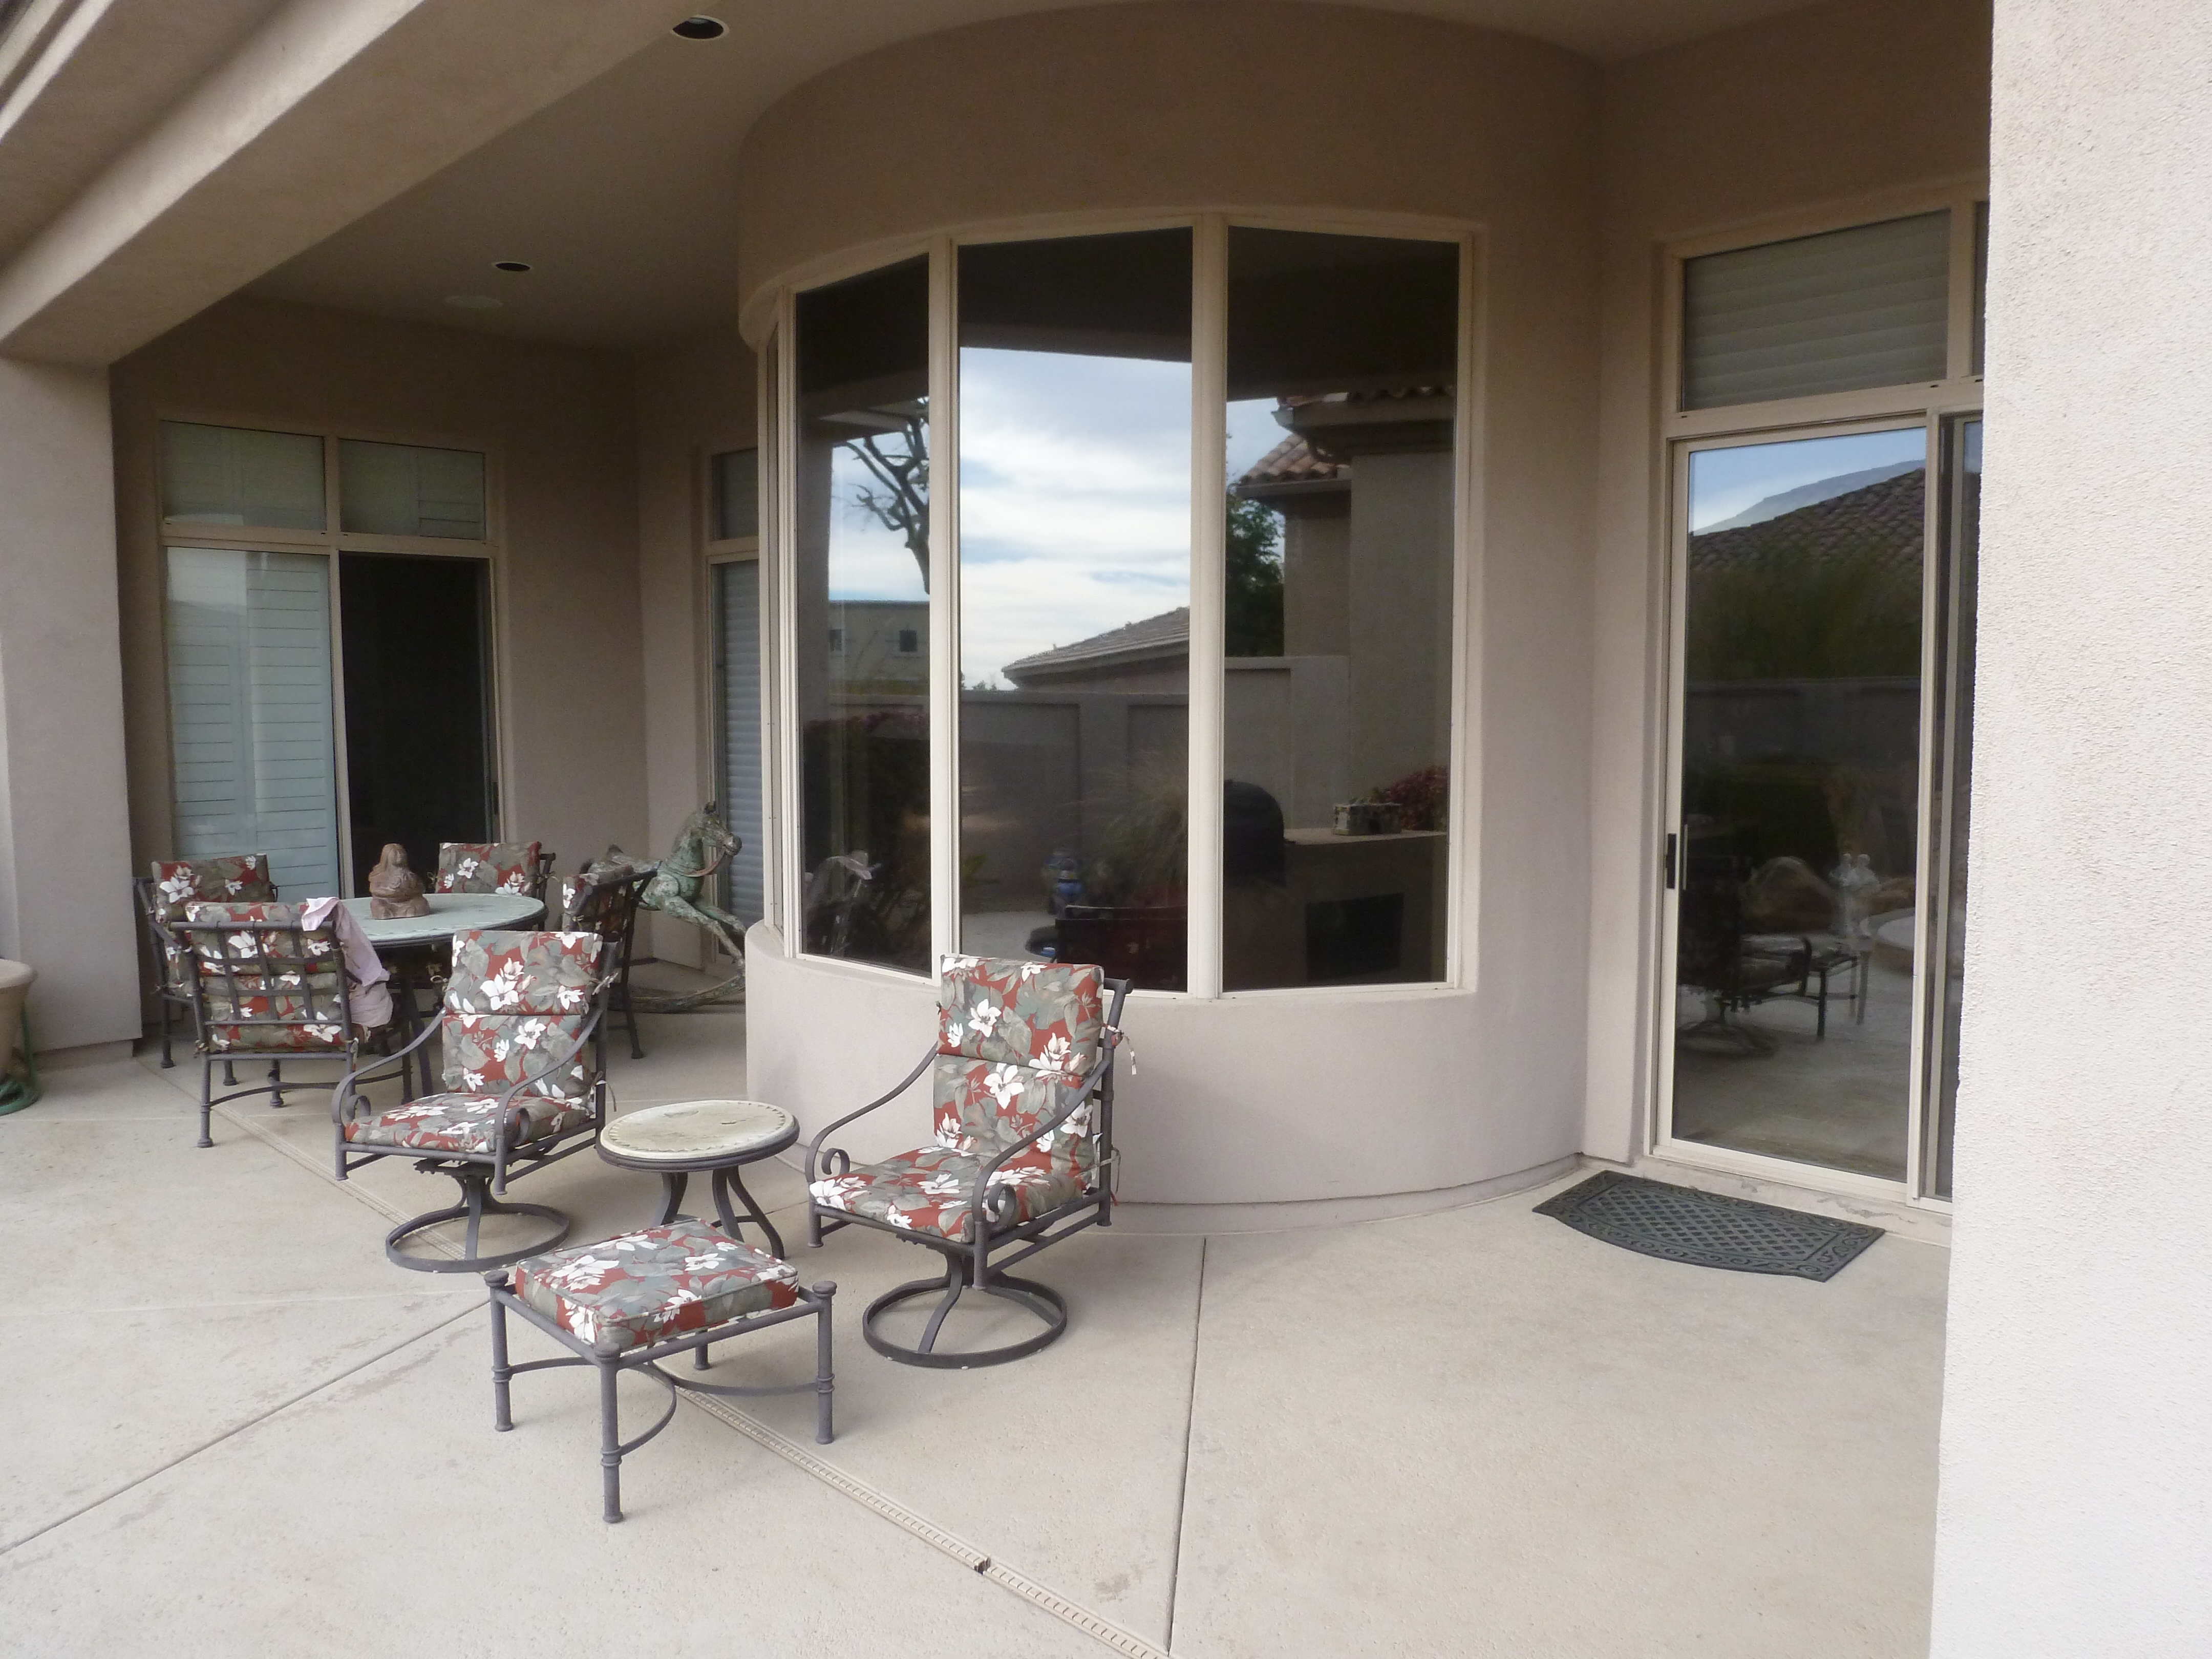 Residential & Commercial Window Tinting - Scottsdale, AZ